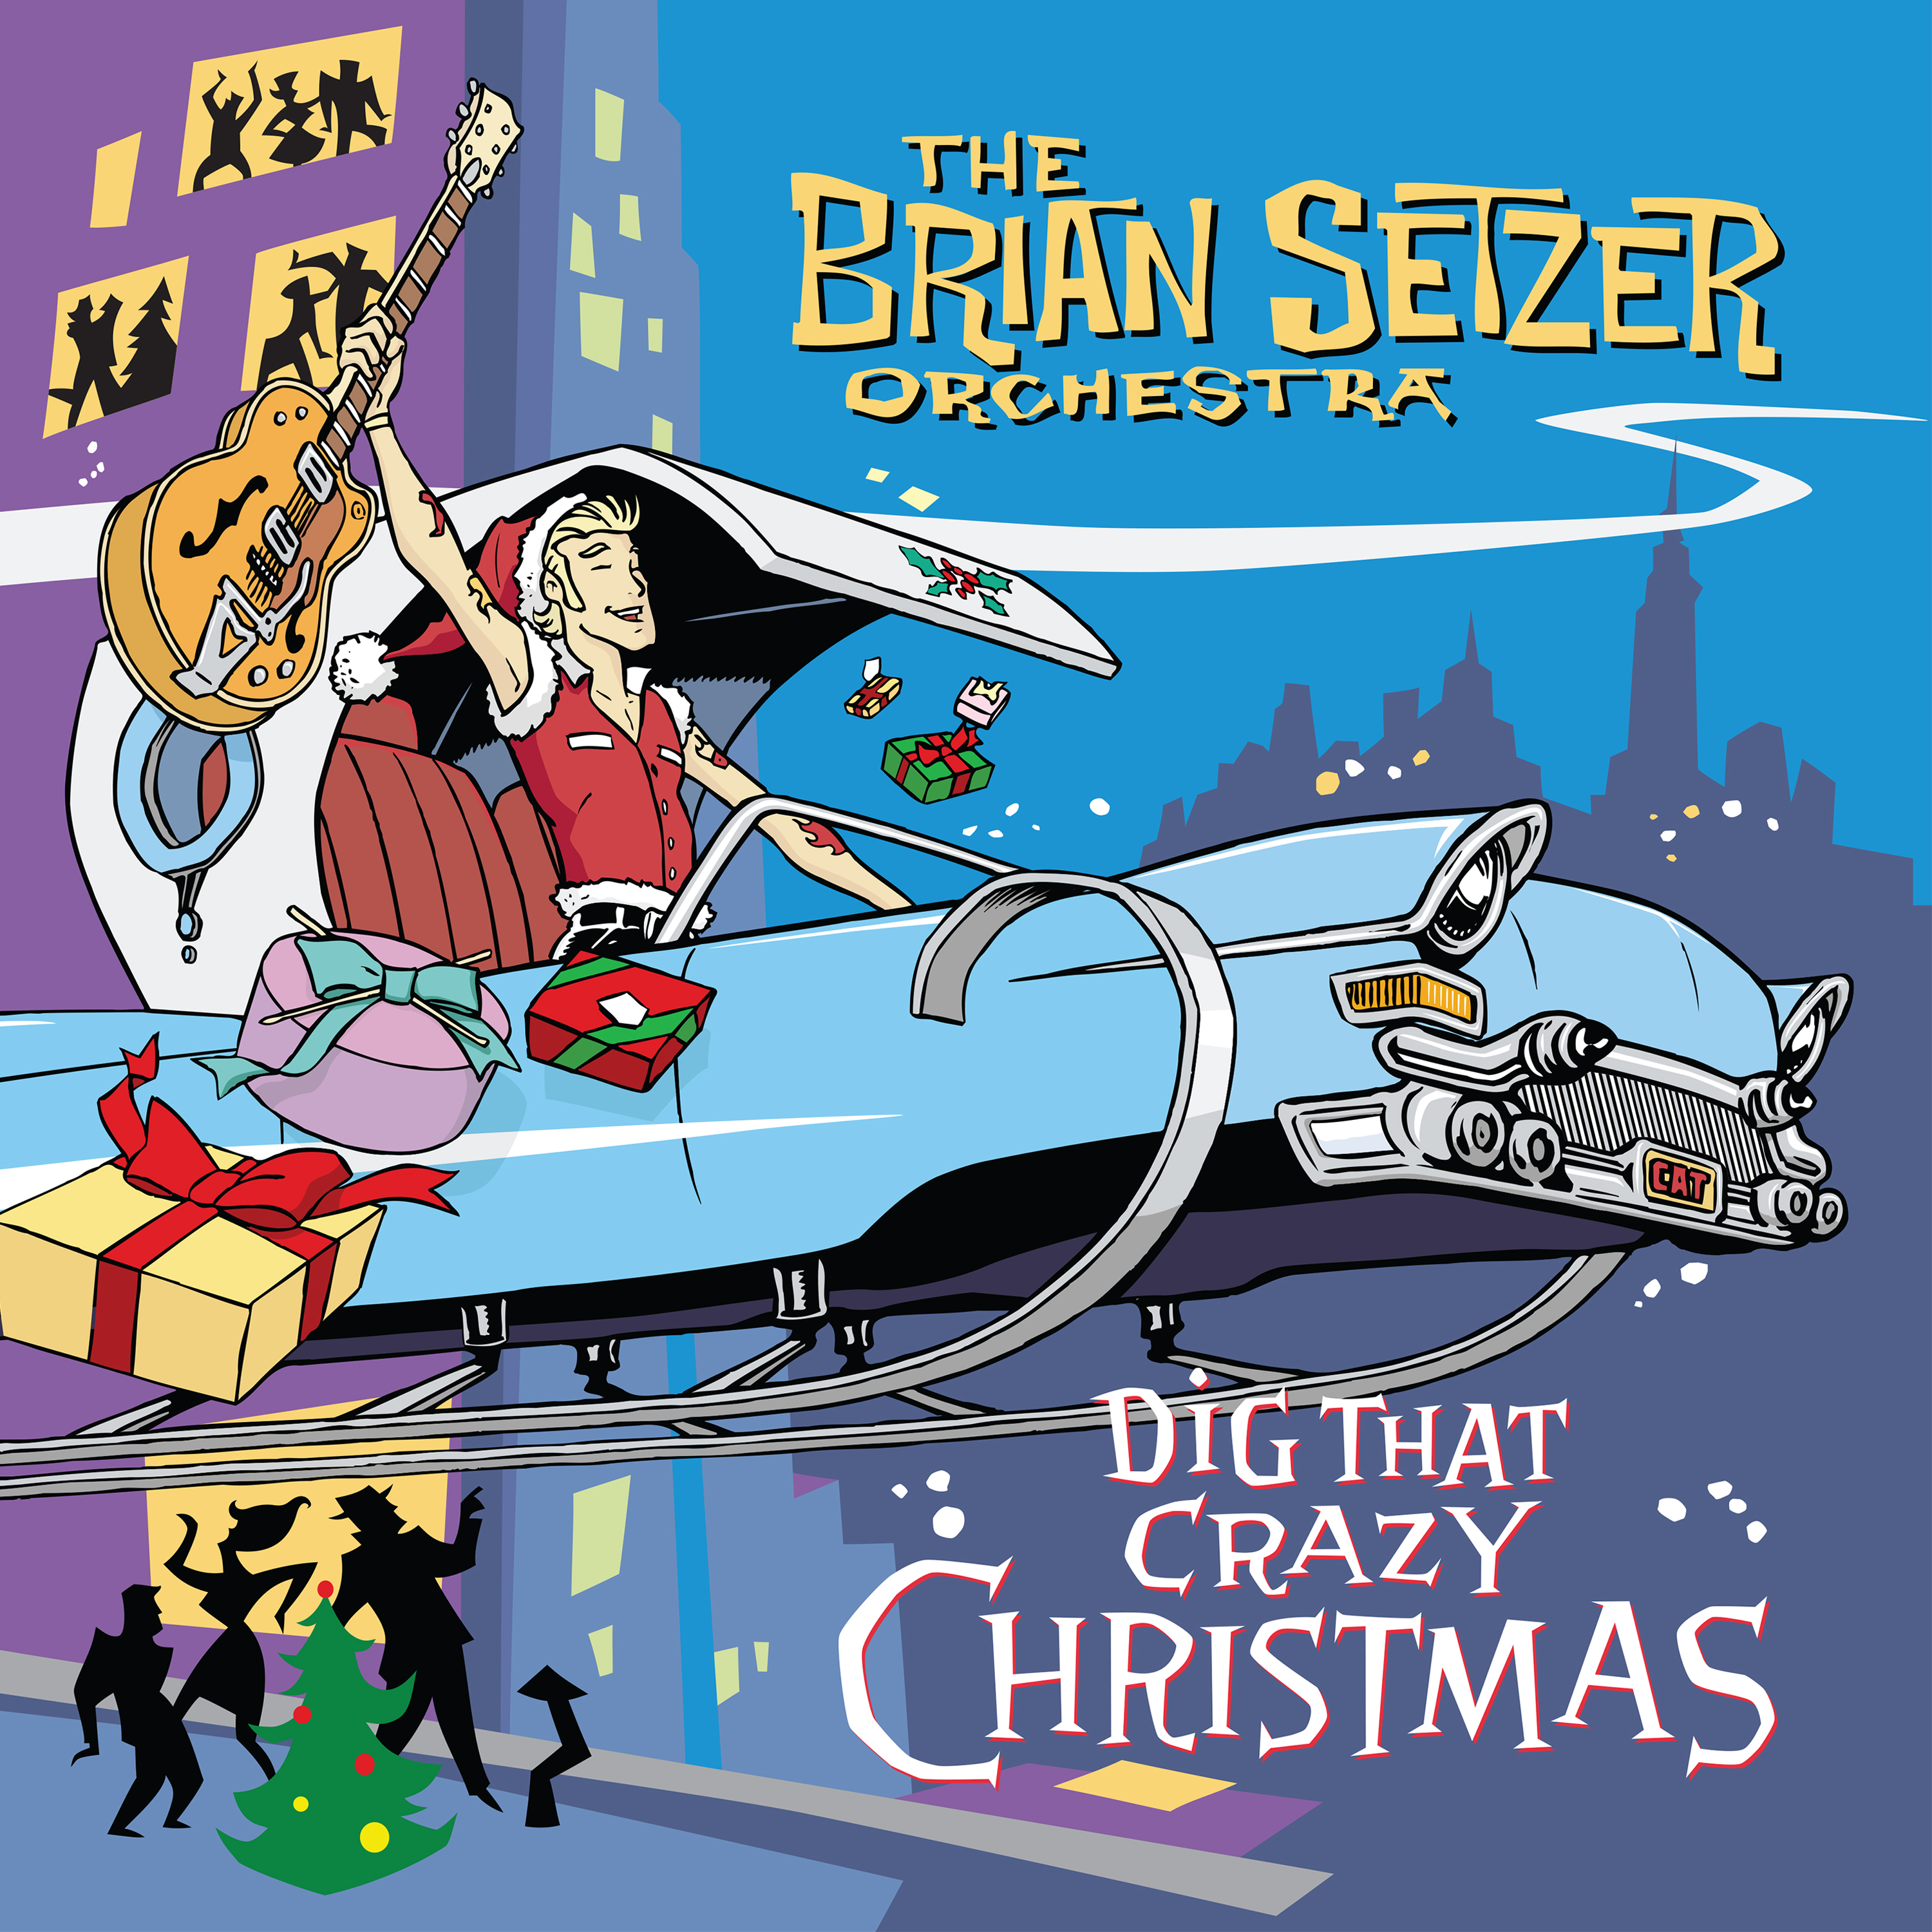 The Brian Setzer Orchestra Announce Two Limited Edition